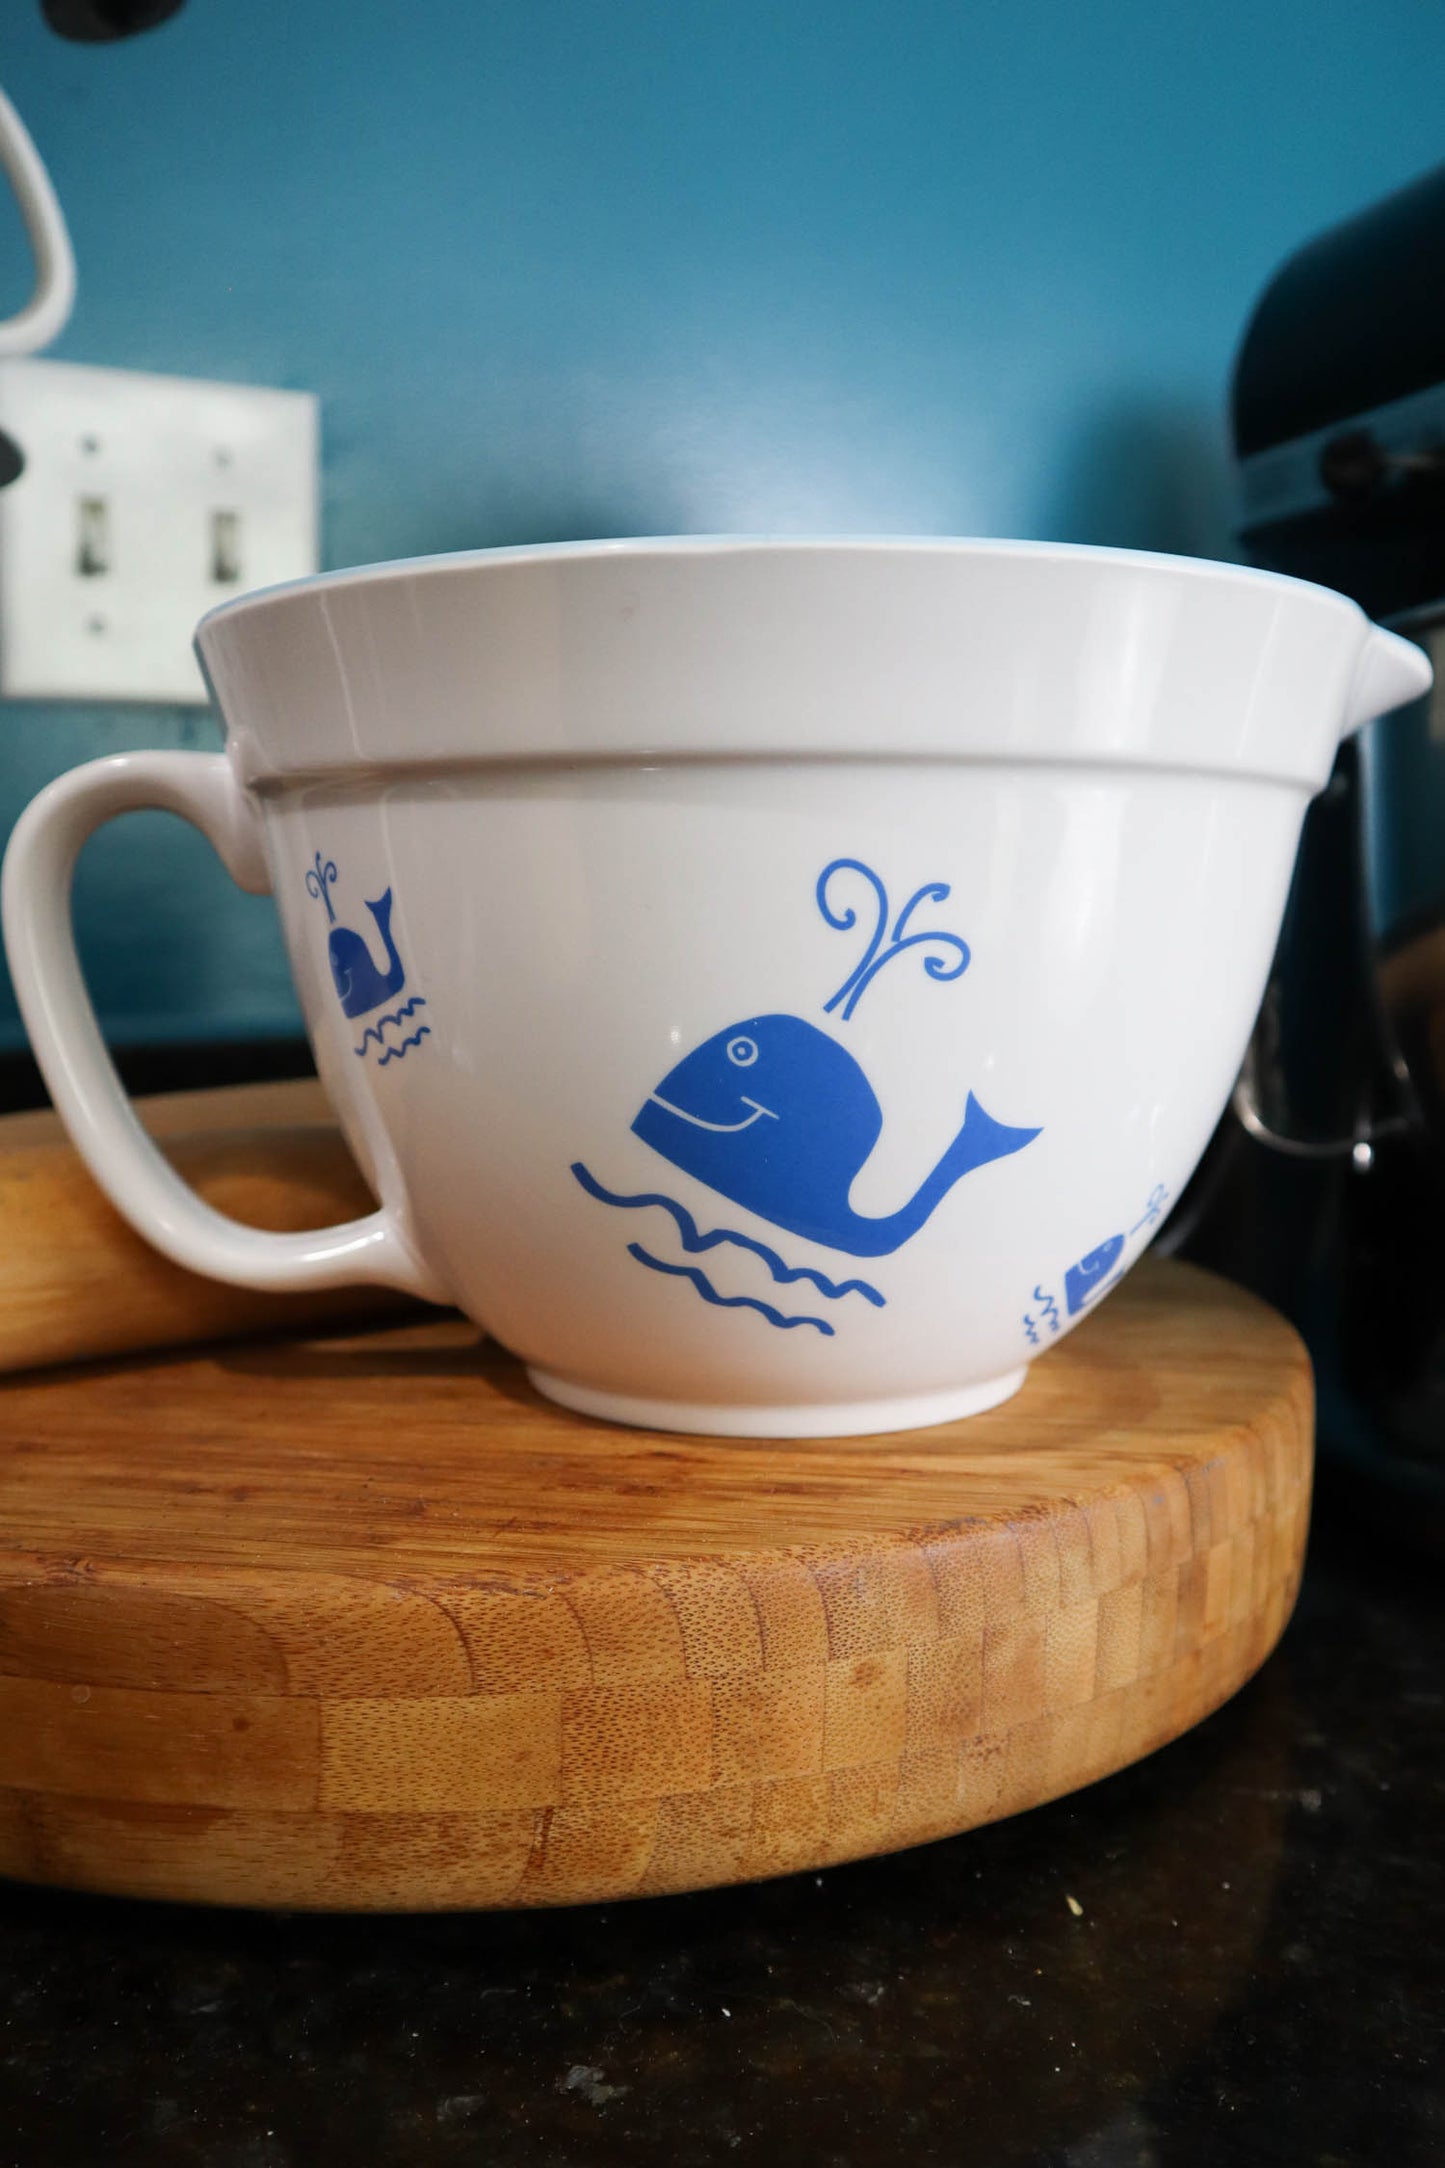 Whaley Good Mixing Bowl